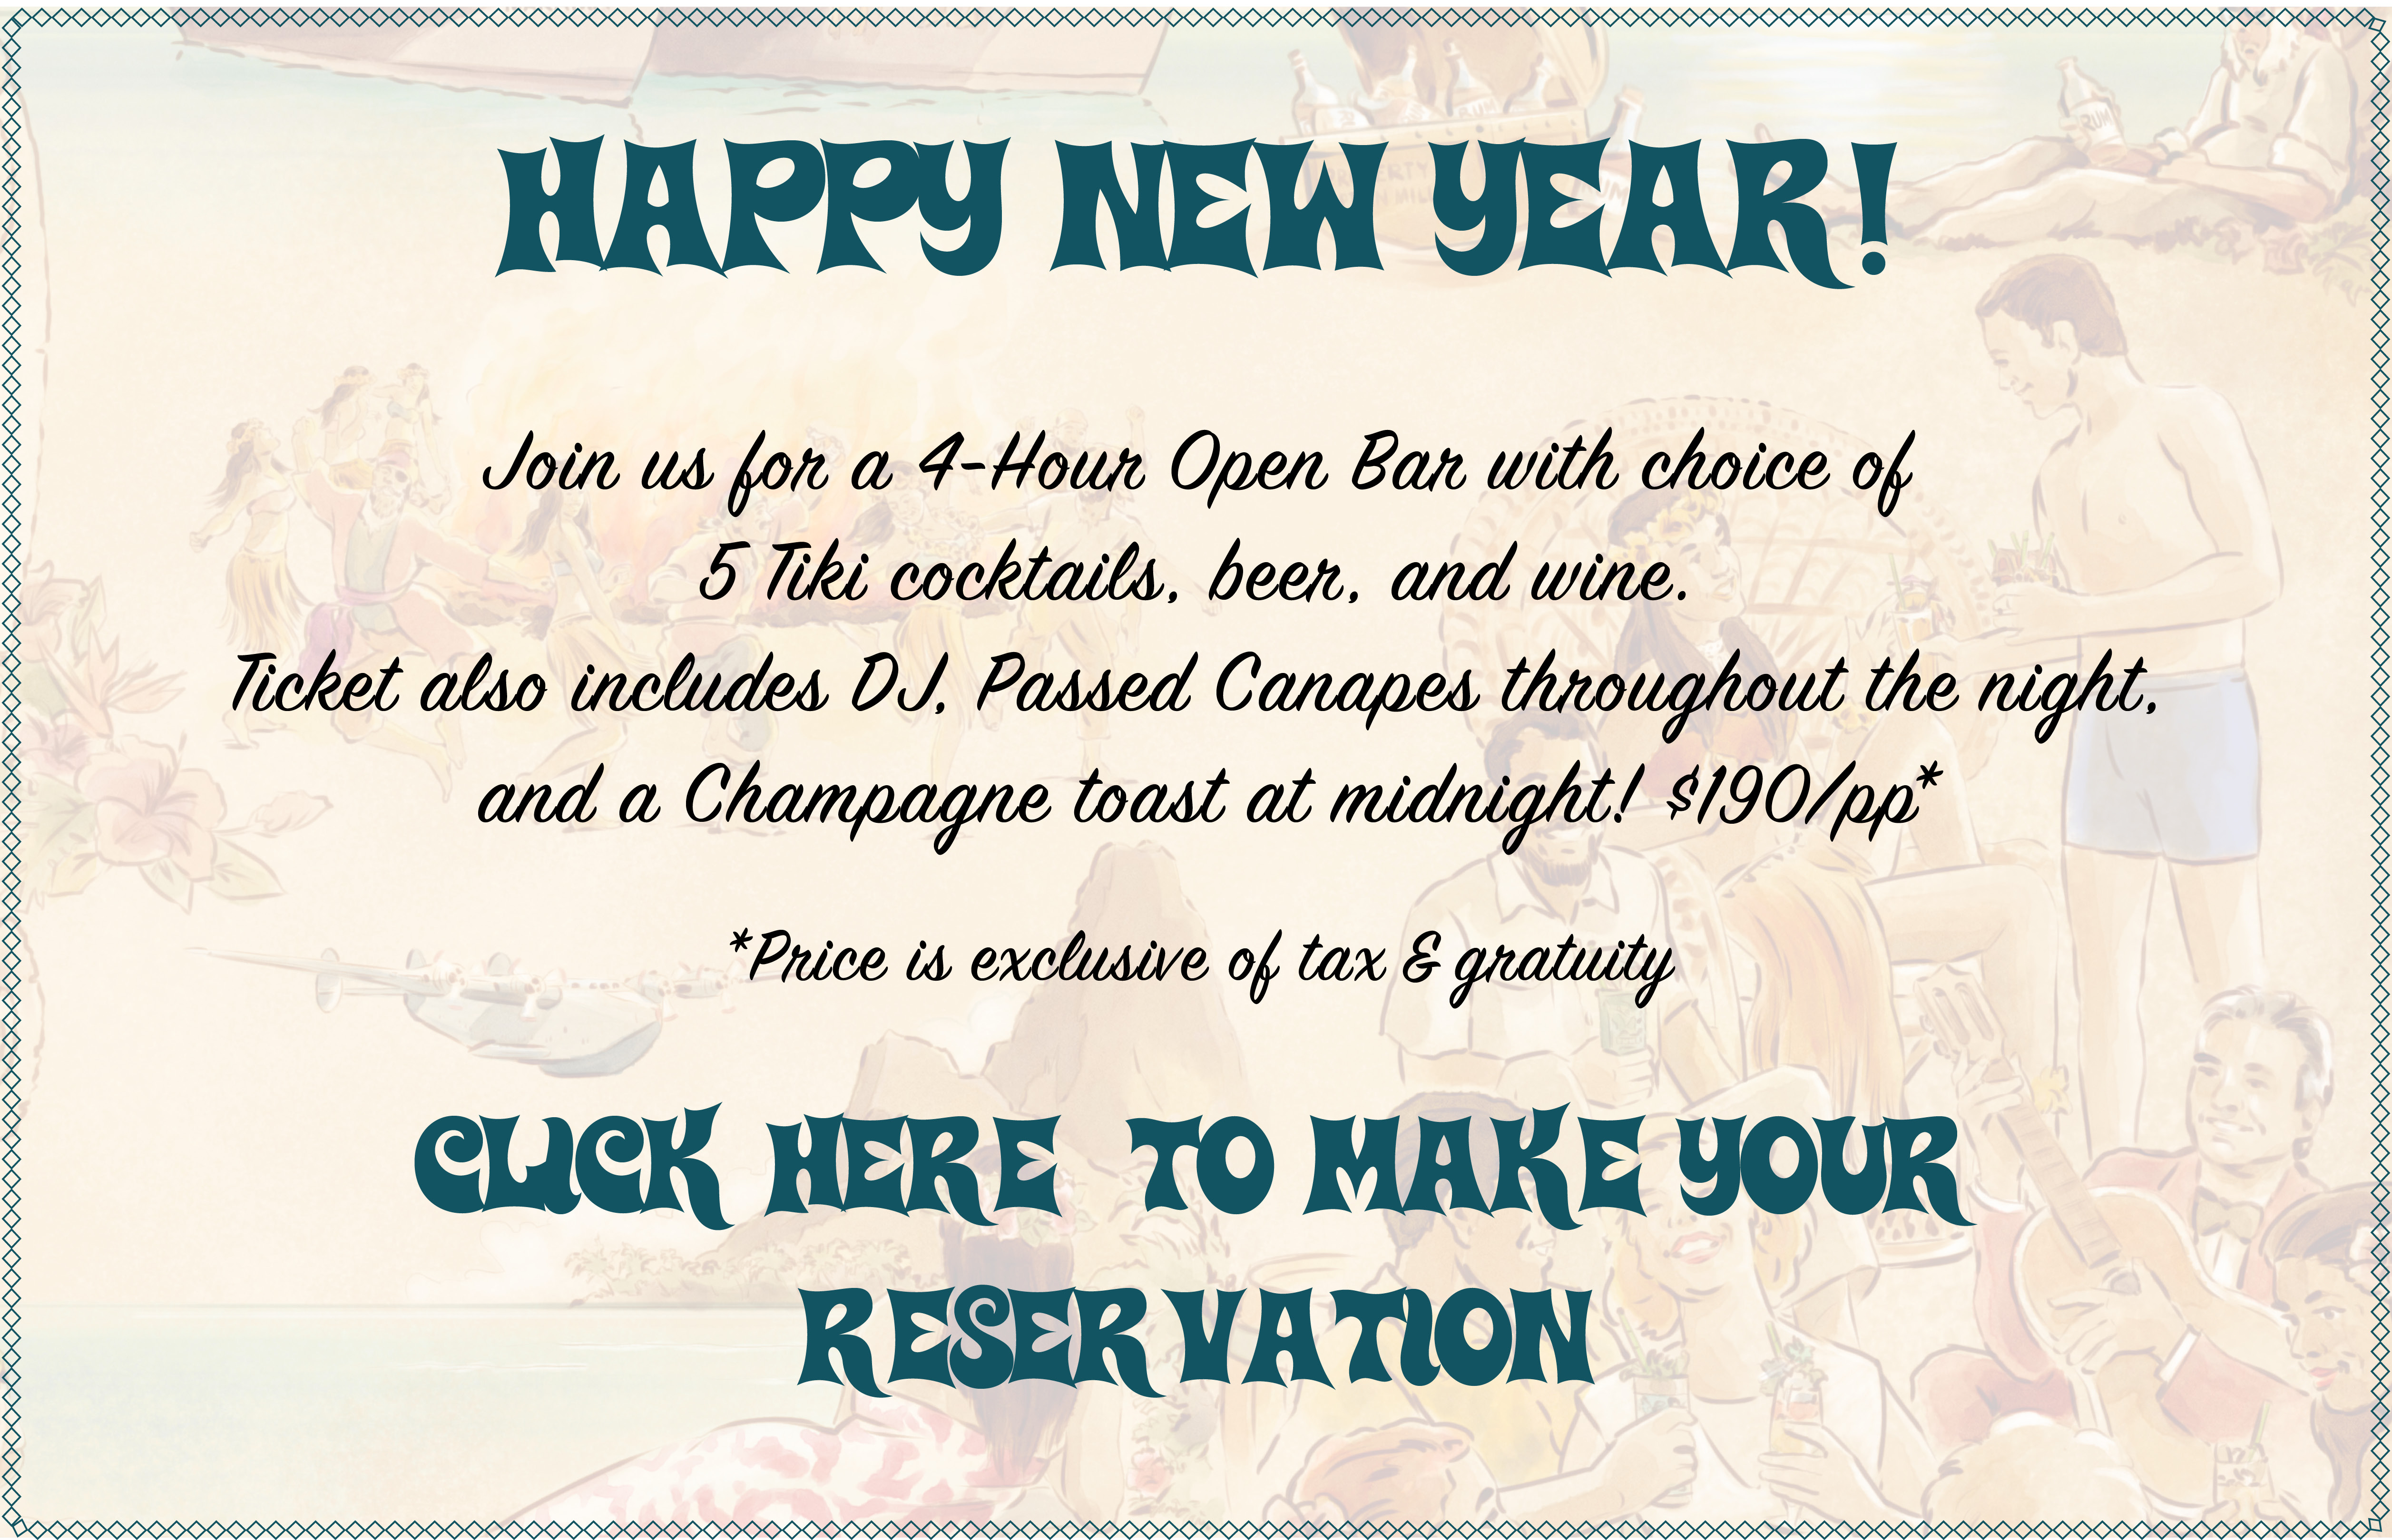 Make your New Year's Eve reservation